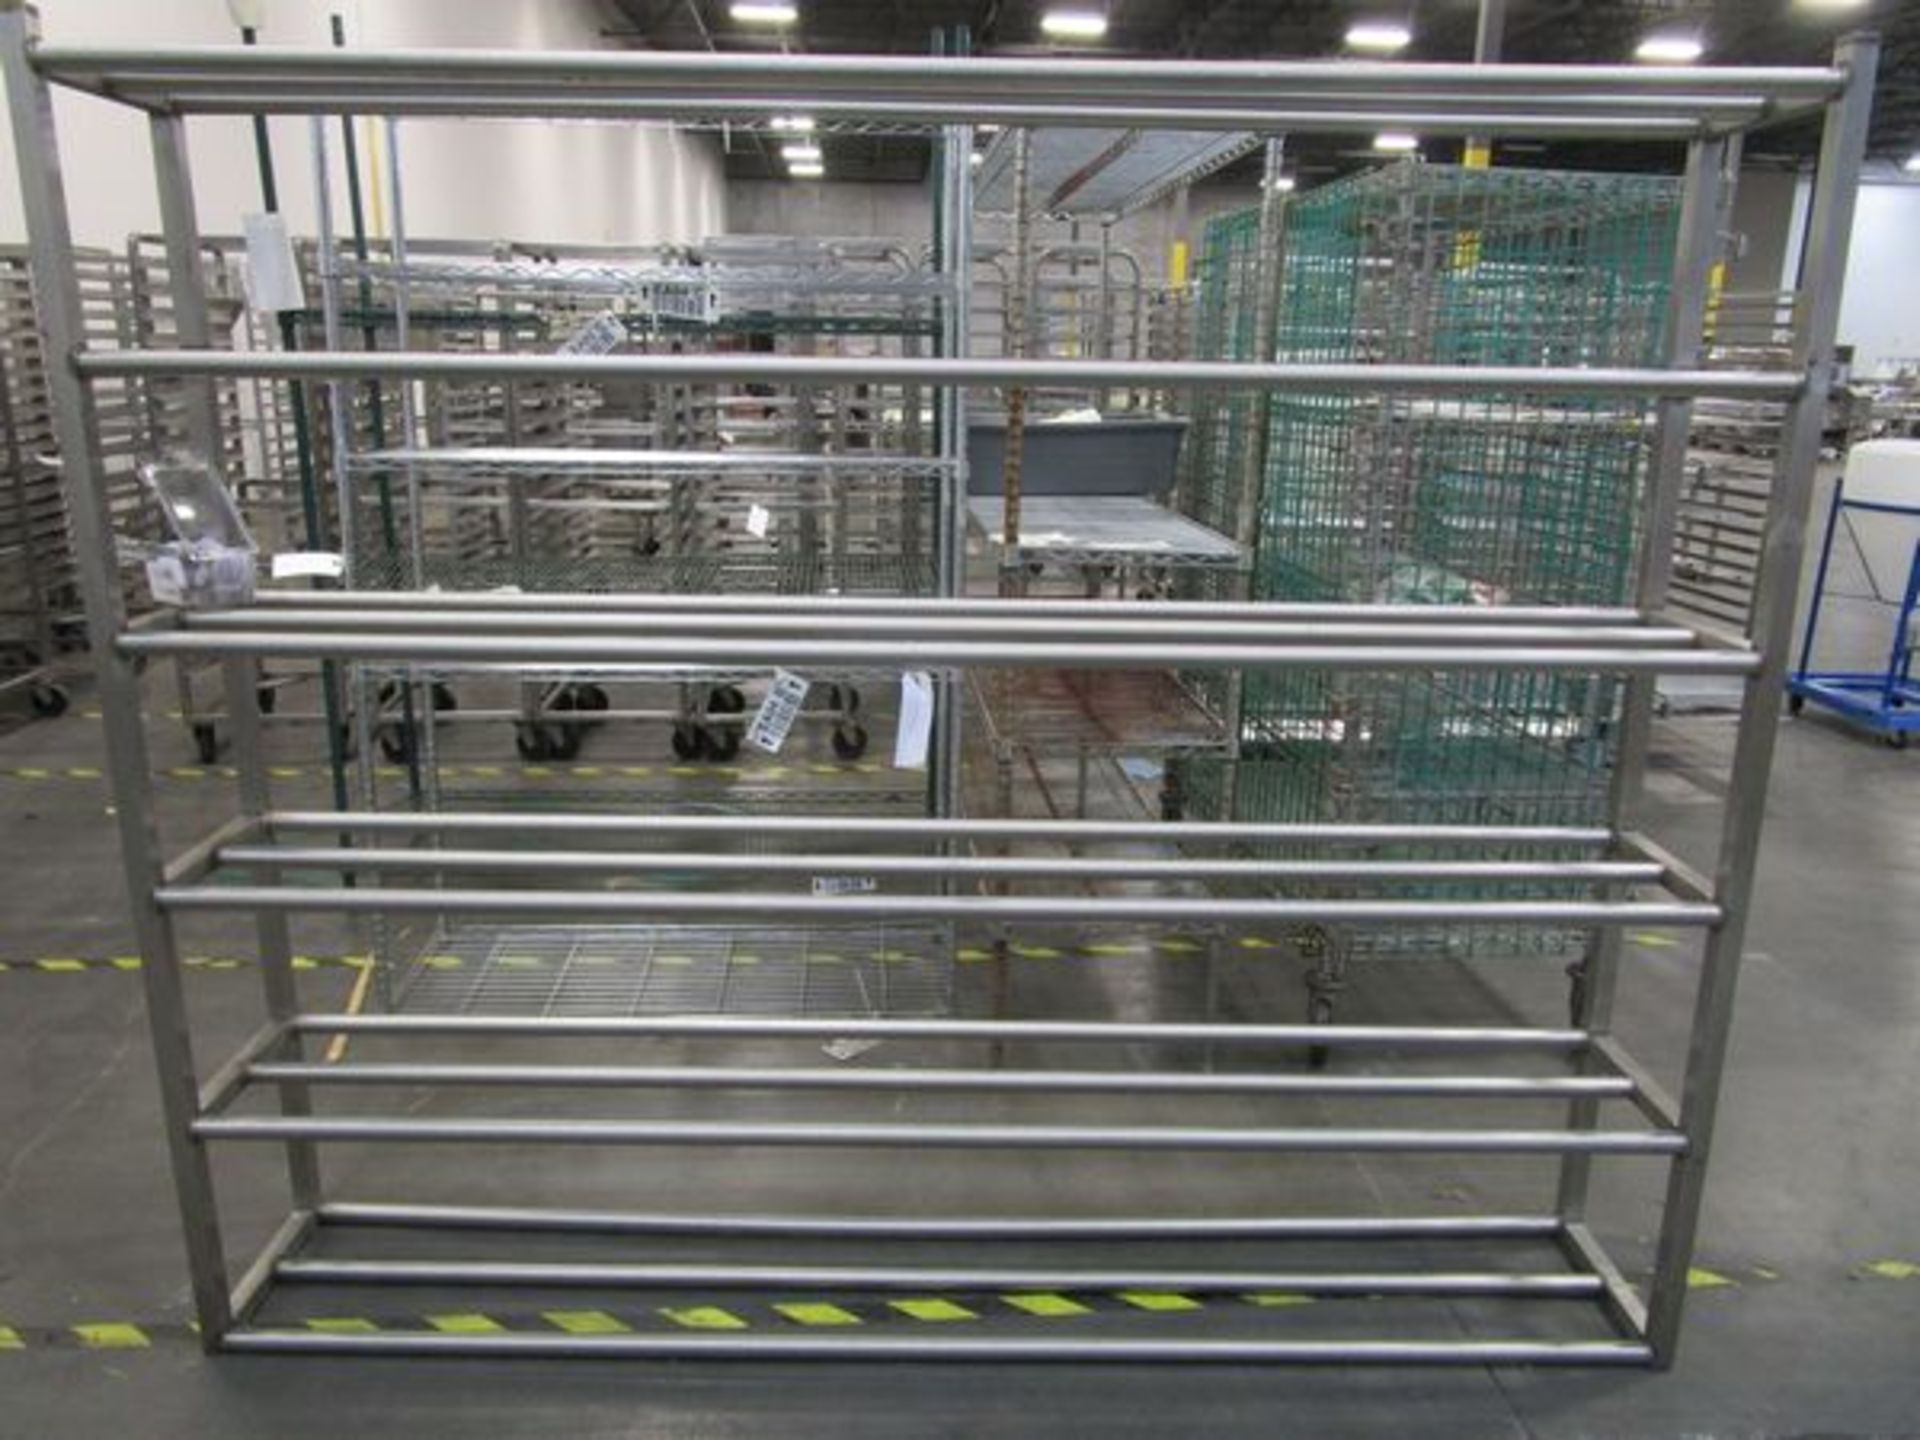 12"x 80" Stainless Steel Rack | Rigging Fee: $25